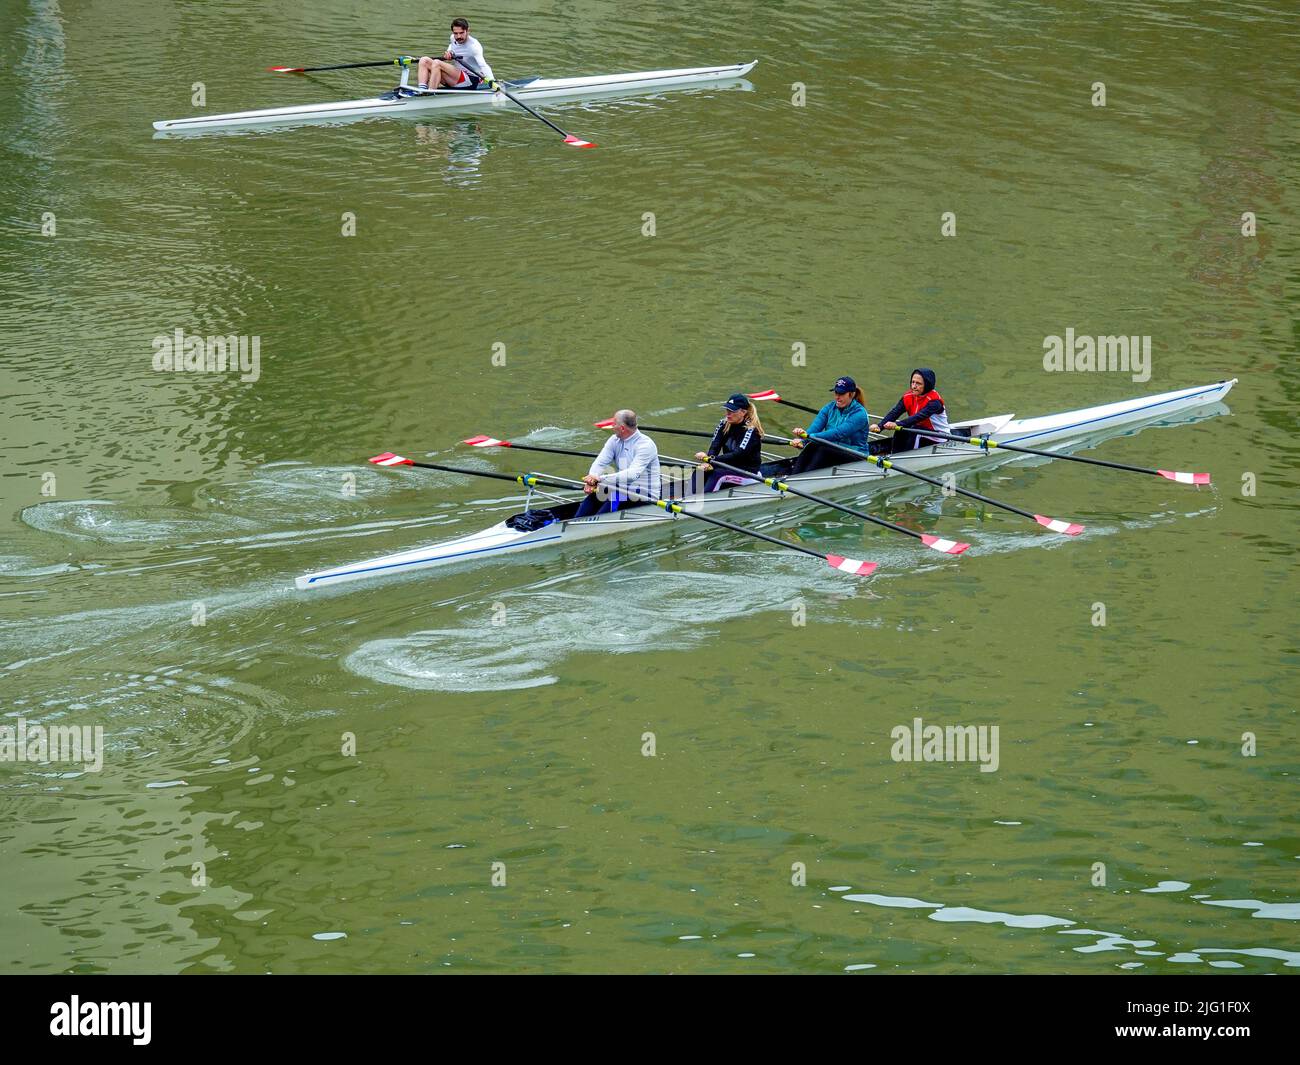 Rowing, training, on the Arno River, Florence, Italy. Stock Photo